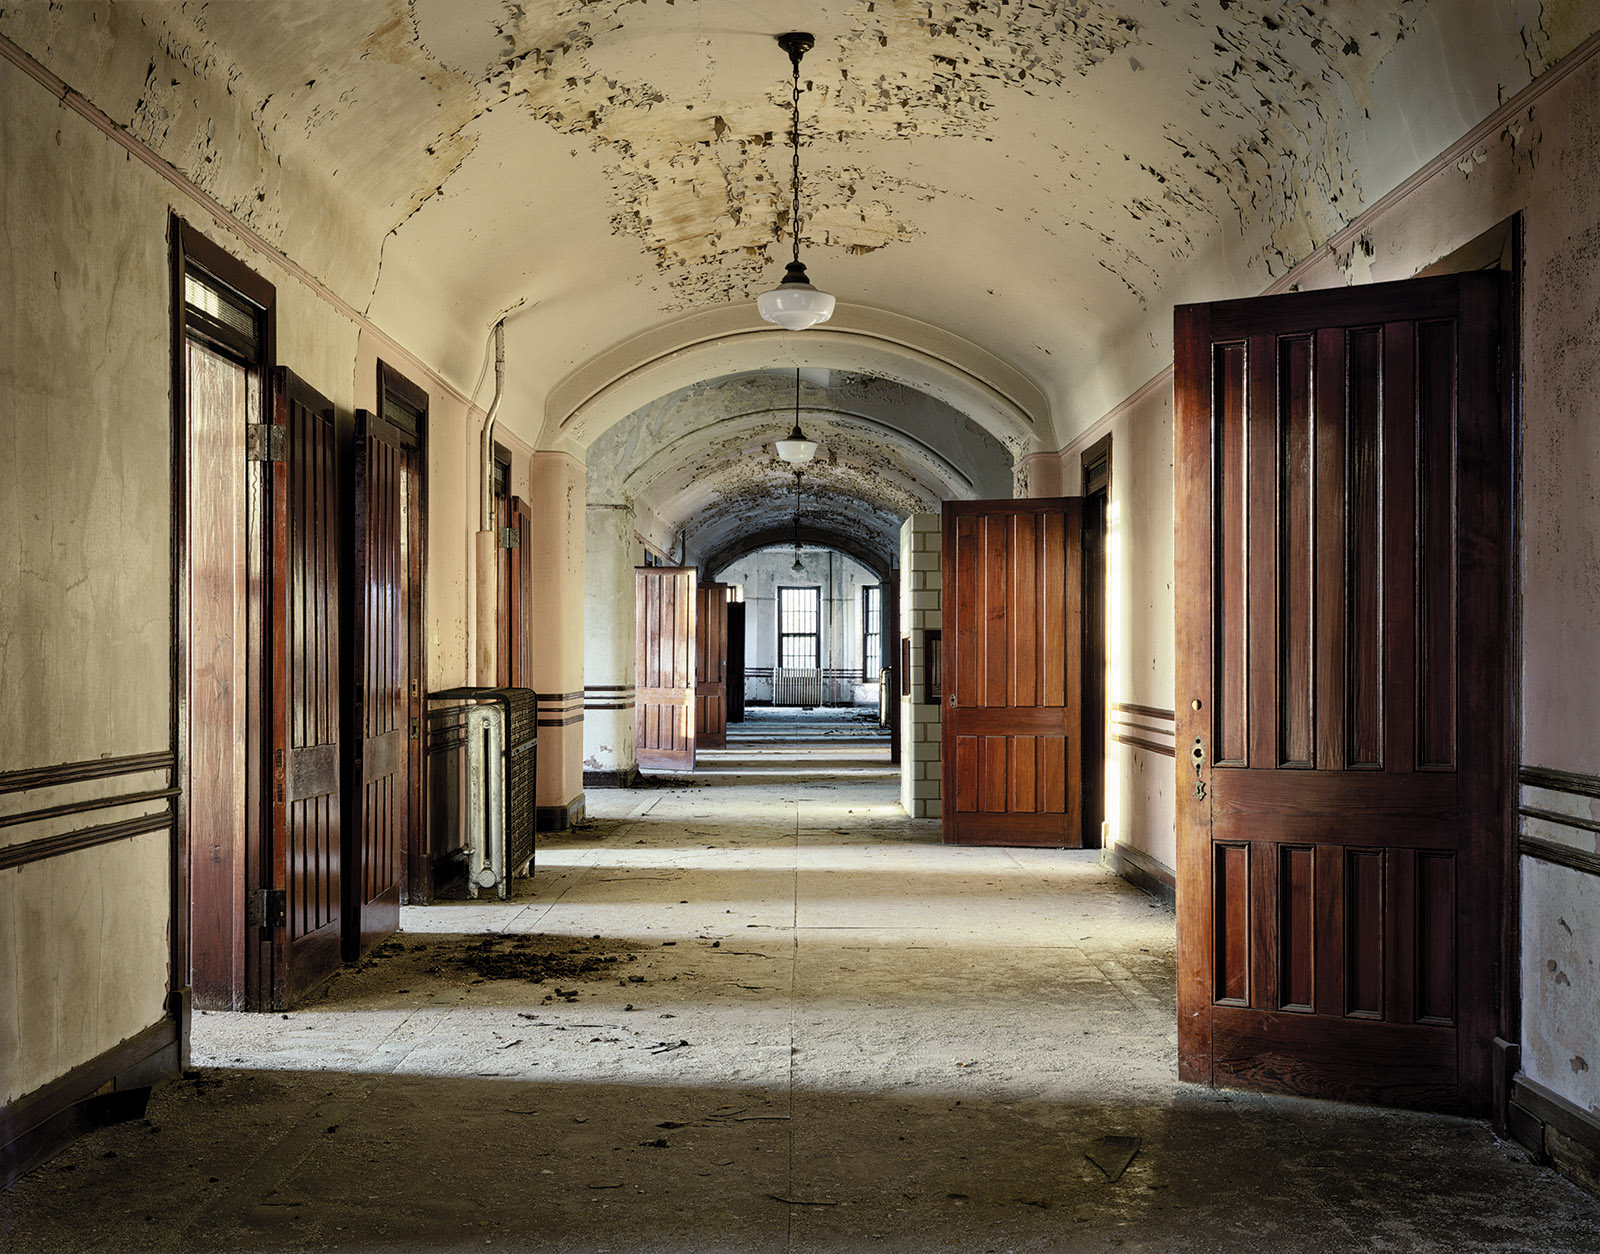 An abandoned ward at Kankakee State Hospital, Illinois; photograph by Christopher Payne from his book Asylum: Inside the Closed World of State Mental Hospitals, 2009